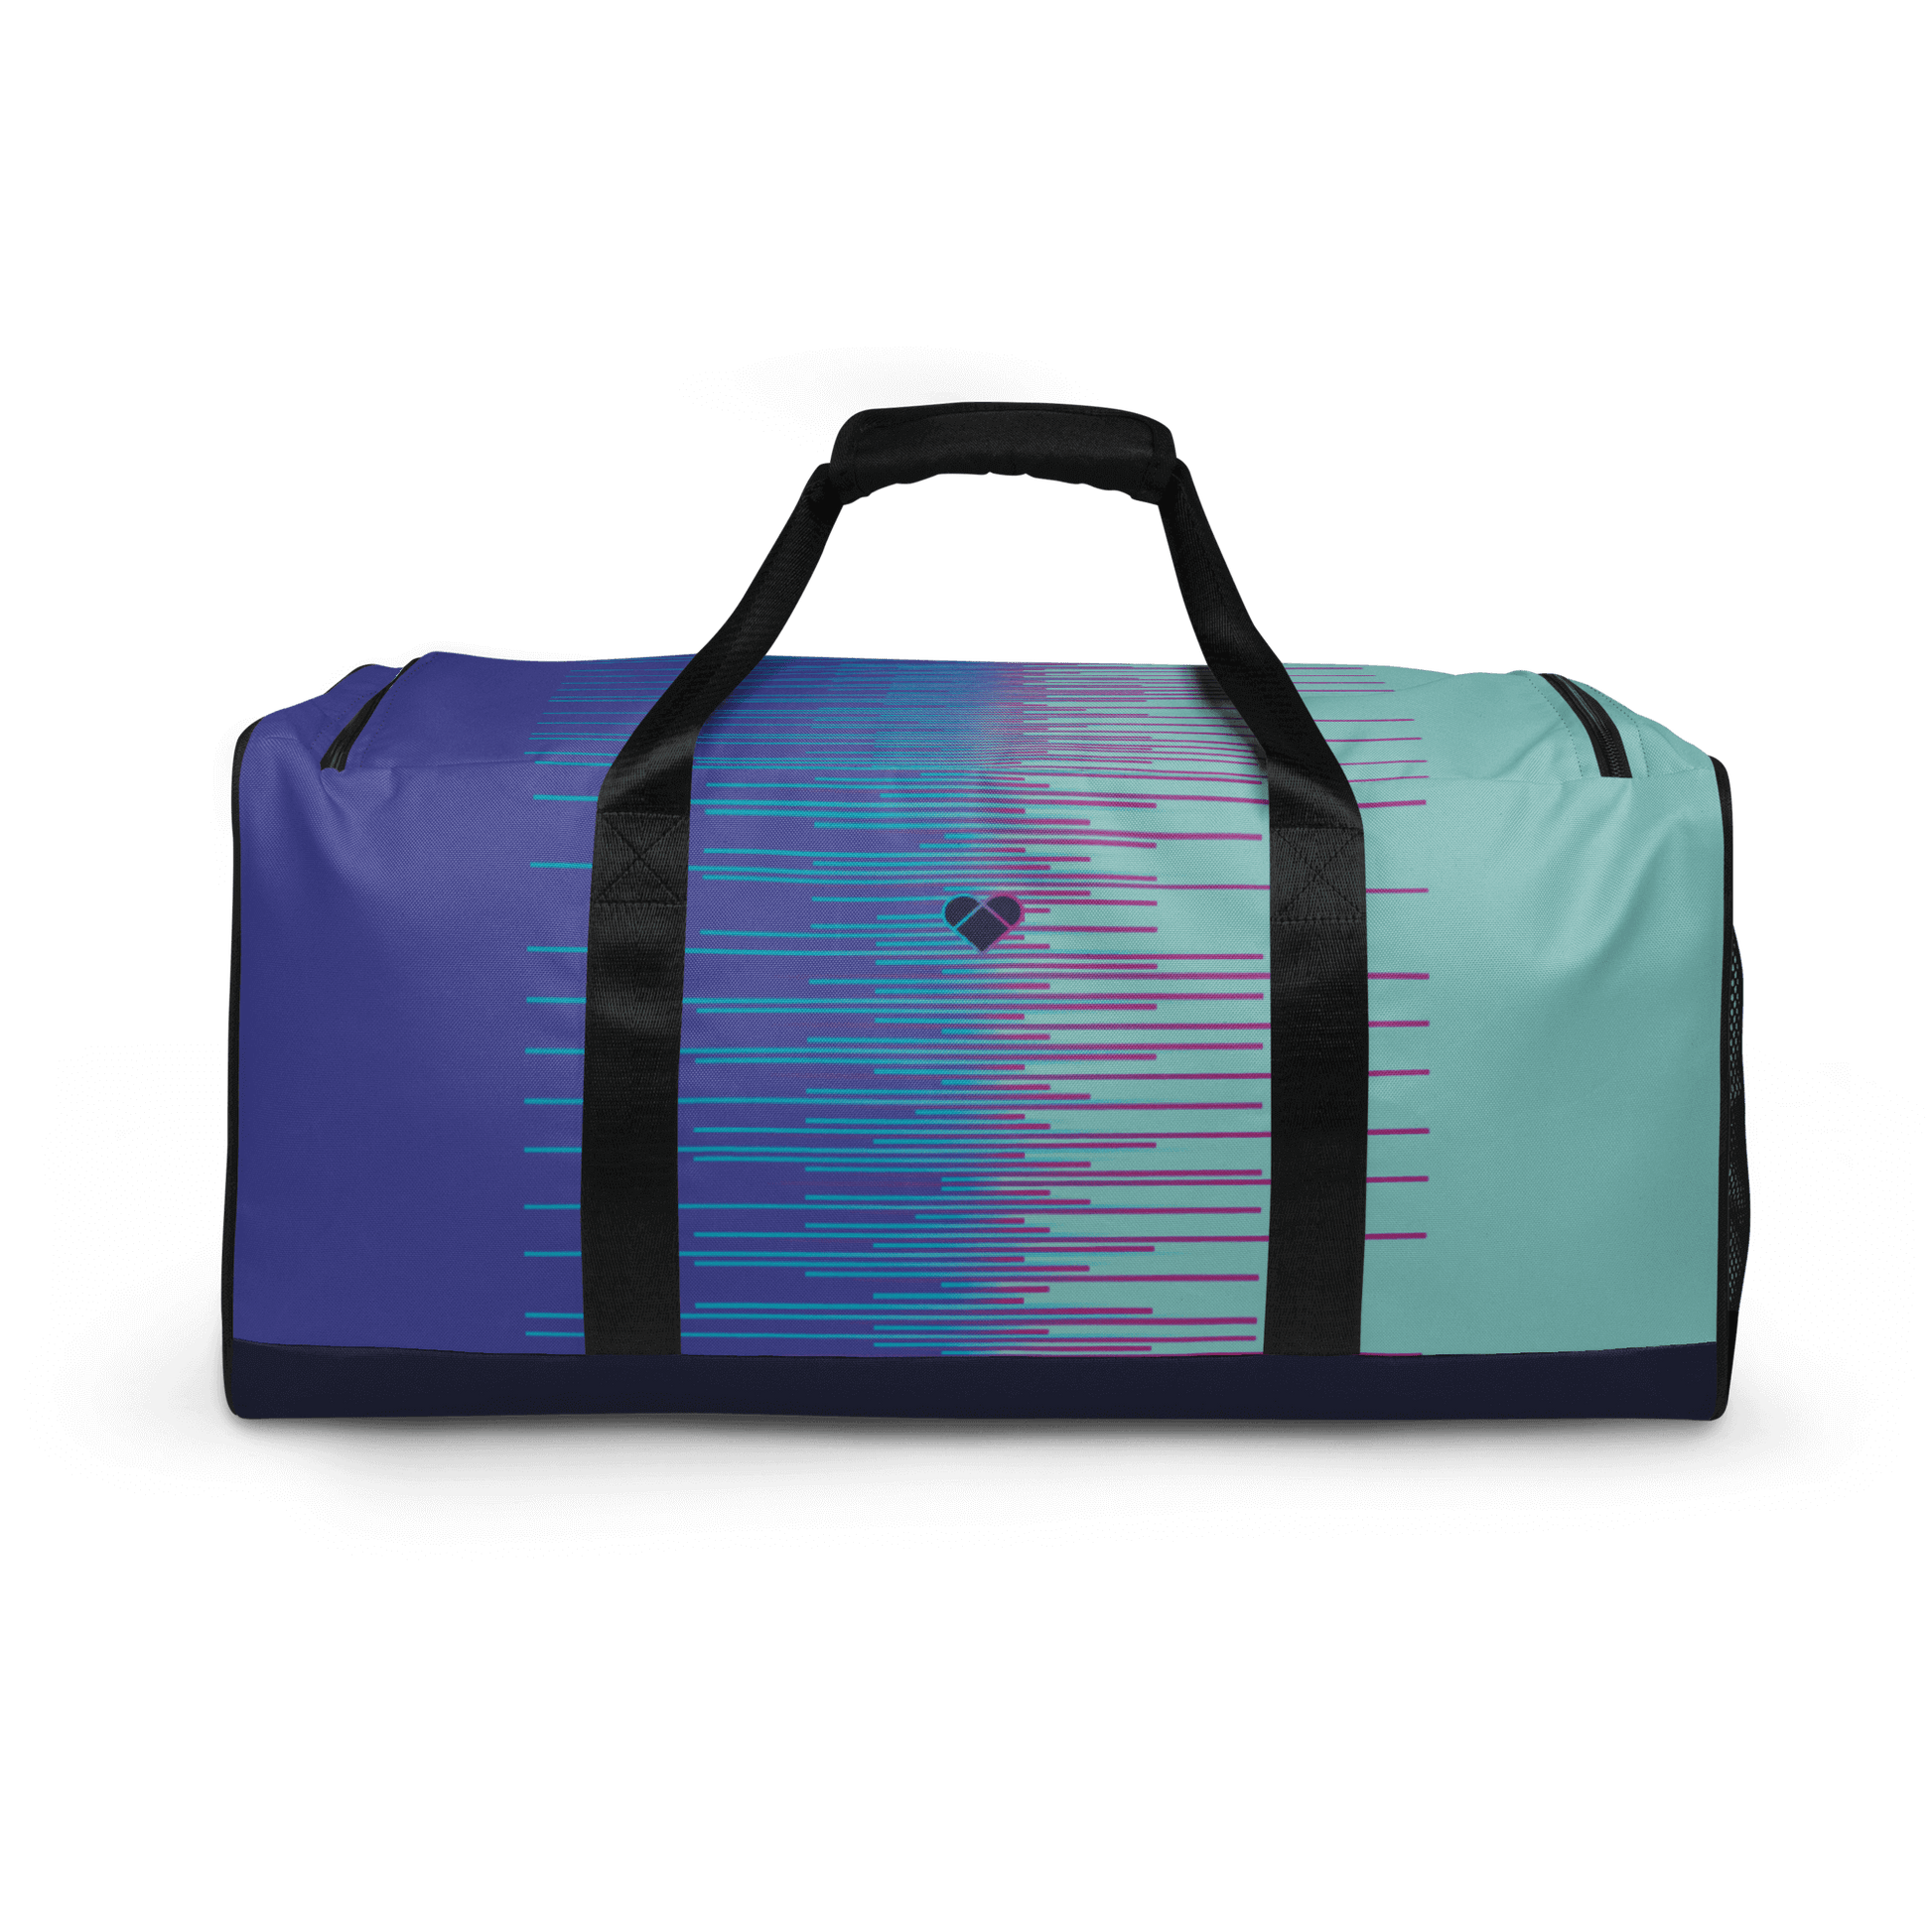 Gradient Striped Duffle Bag: Amor Dual Collection